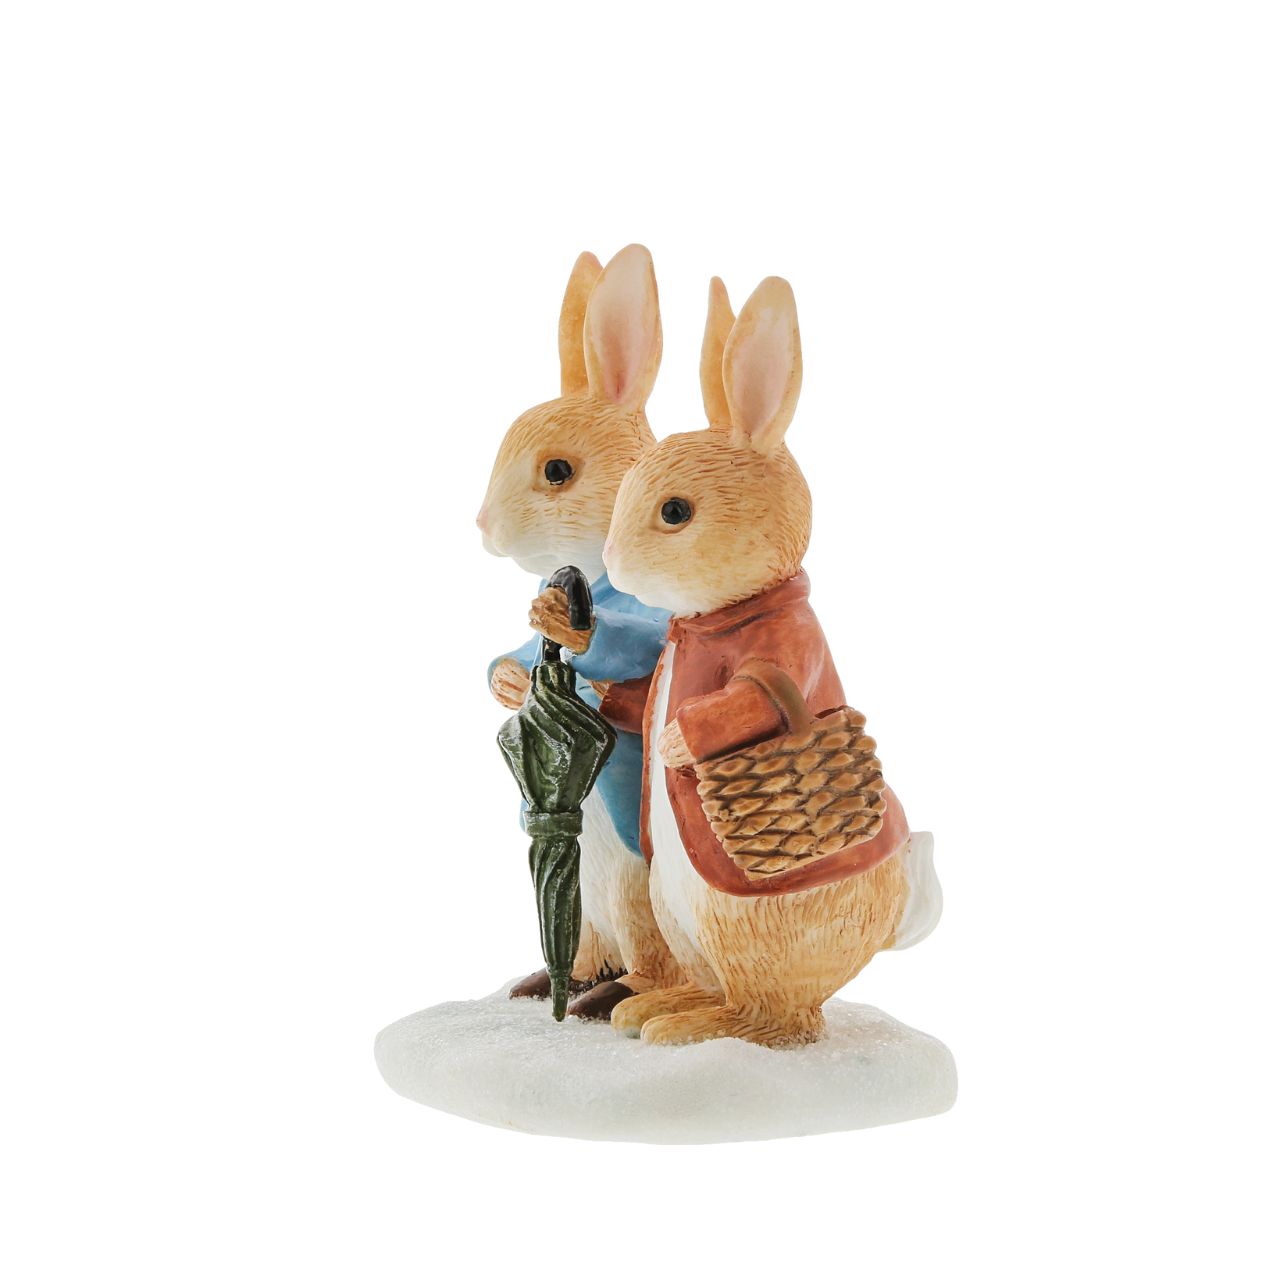 Beatrix Potter Peter Rabbit and Flopsy in Winter Figurine  Brand new from Enesco, our Peter Rabbit and Flopsy in Winter Figurine is the best way to wish a Beatrix Potter fan a Merry Christmas. This charming figurine would make a treasured keepsake over the festive period and would take pride of place in your home.